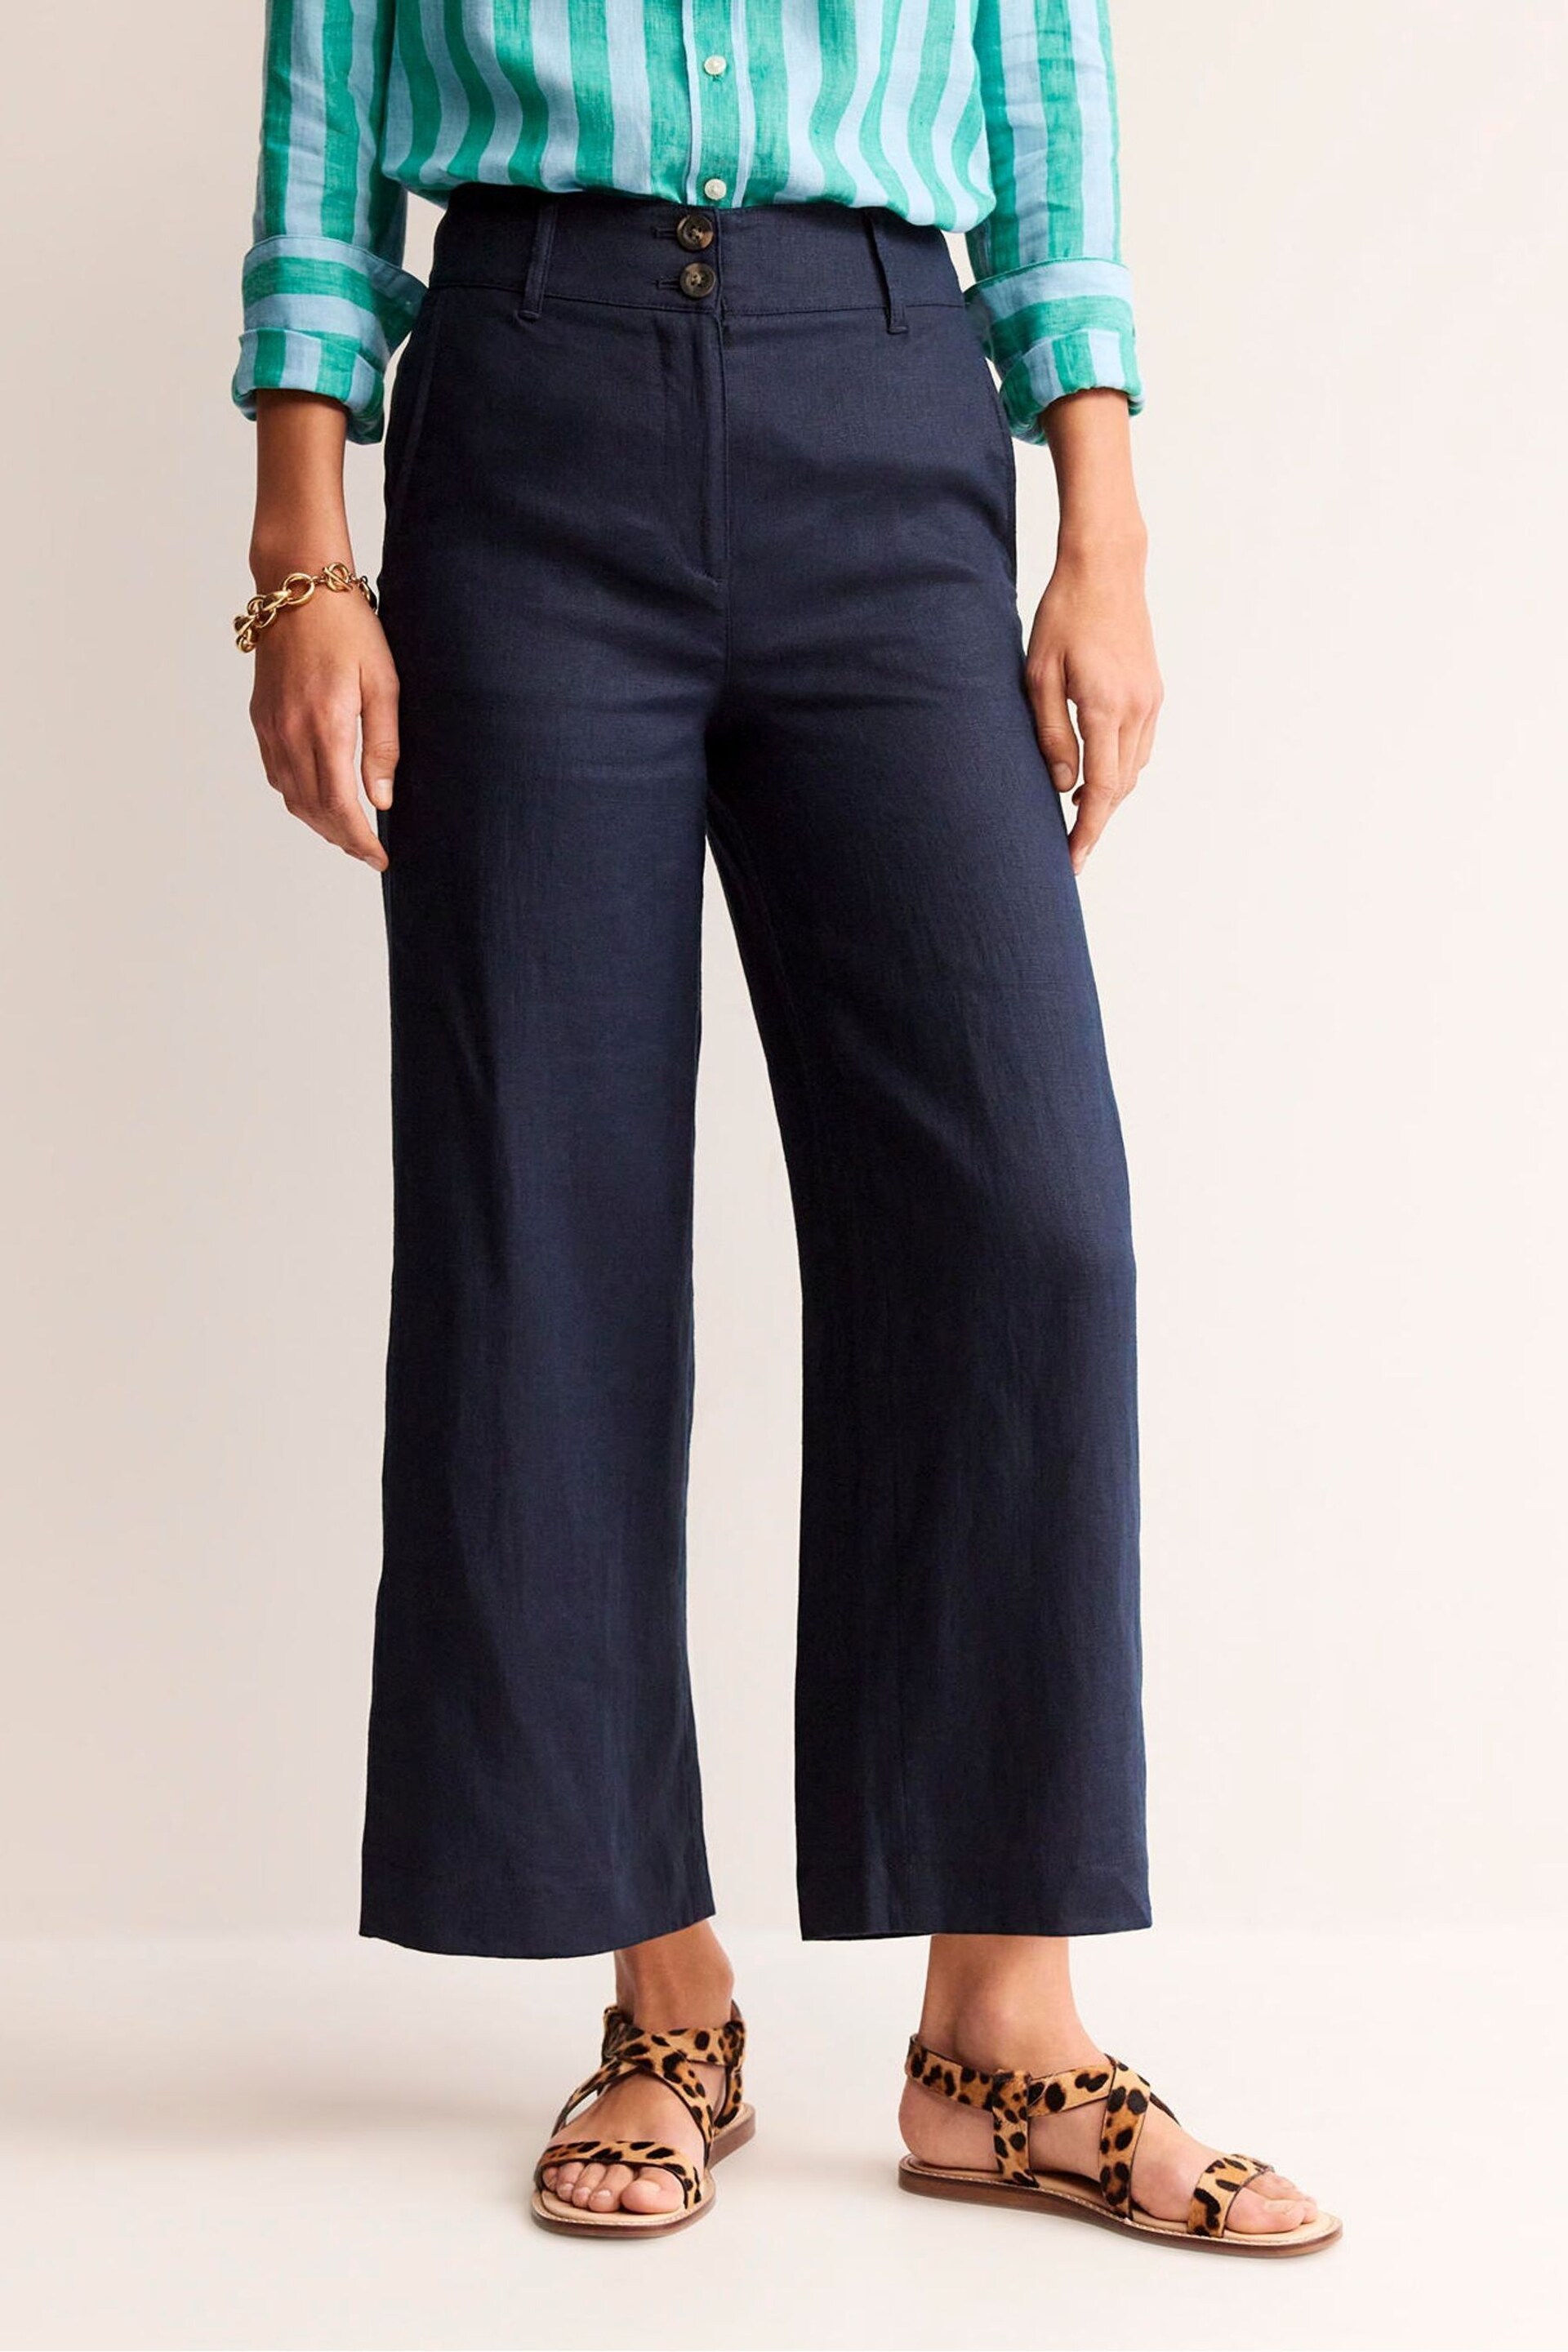 Boden Blue Petite Westbourne Crop Linen Trousers - Image 1 of 5